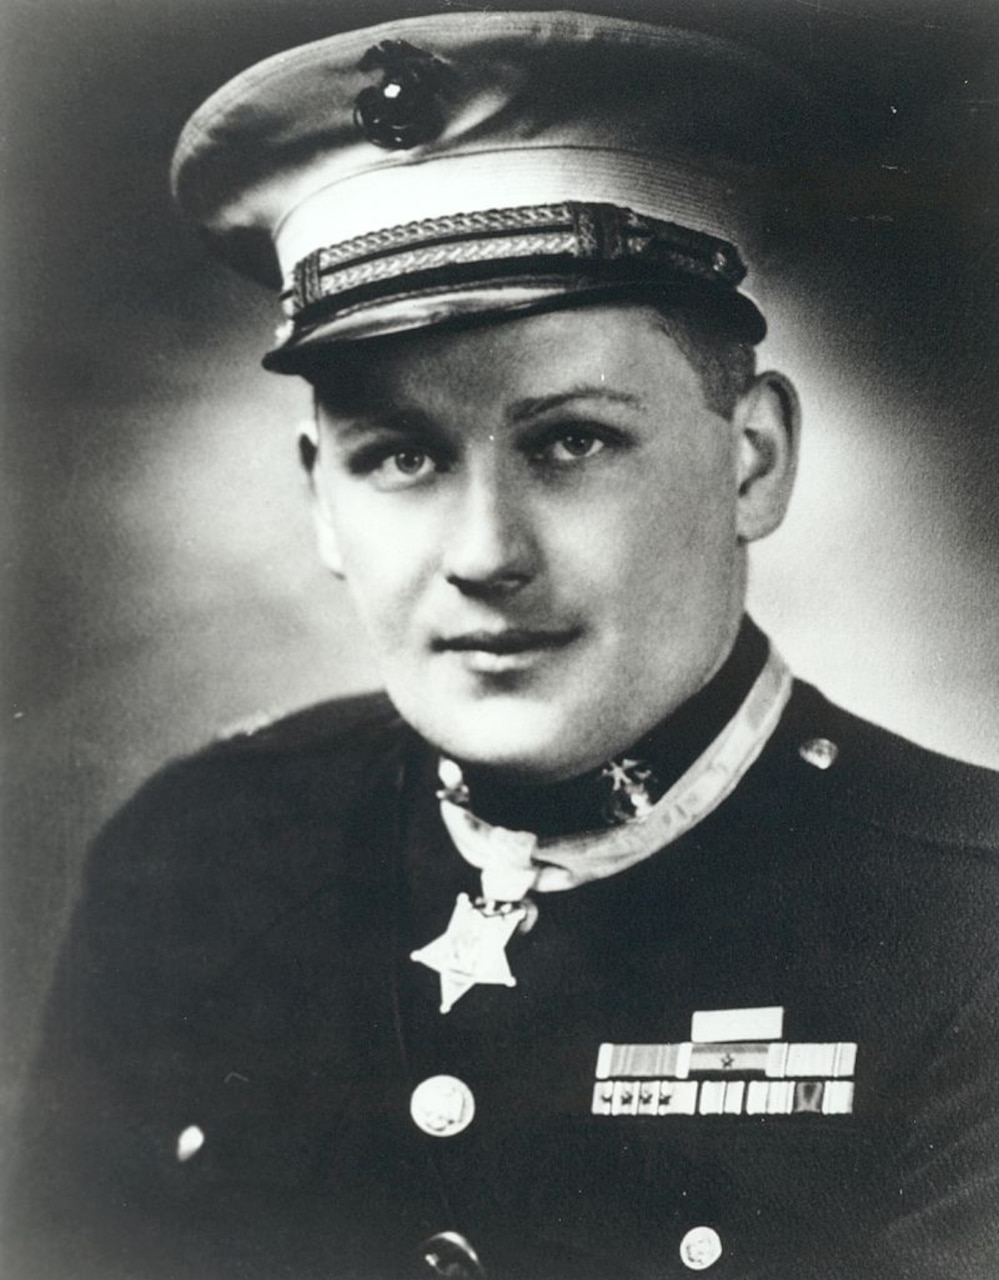 A Marine Corps major in full dress uniform wears the Medal of Honor around his neck.